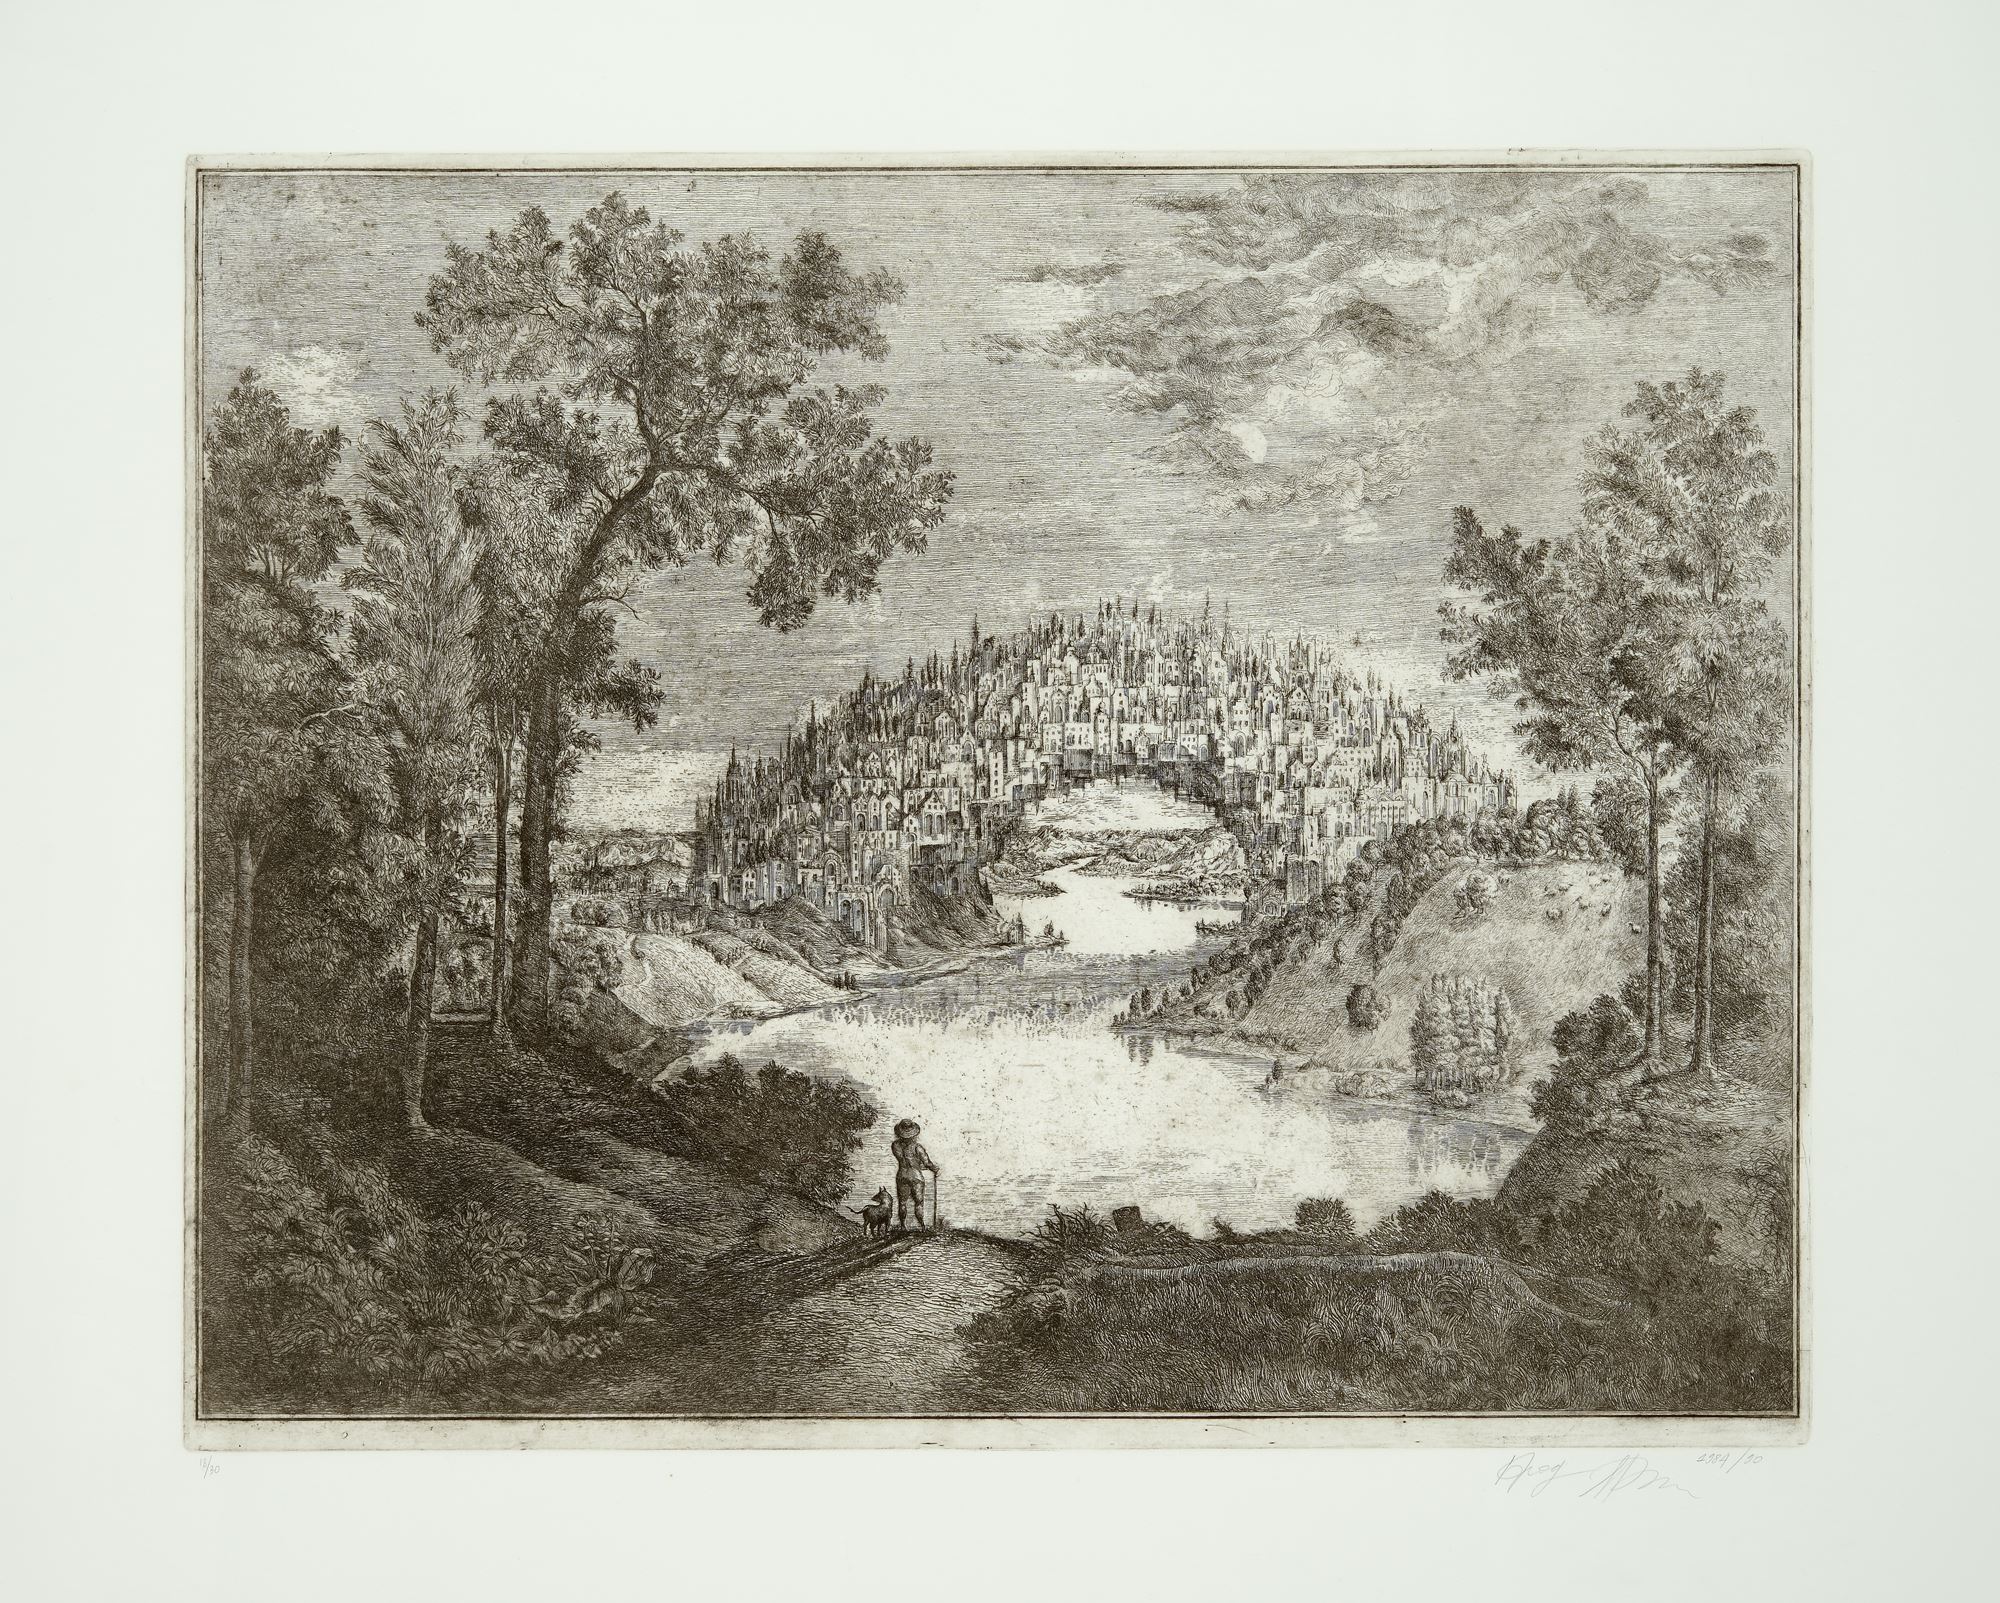 <p>Brodsky and Utkin, <i>Town Bridge</i>. Etching on paper, 31 x 42 inches. Collection of the Nasher Museum of Art at Duke University.</p>
